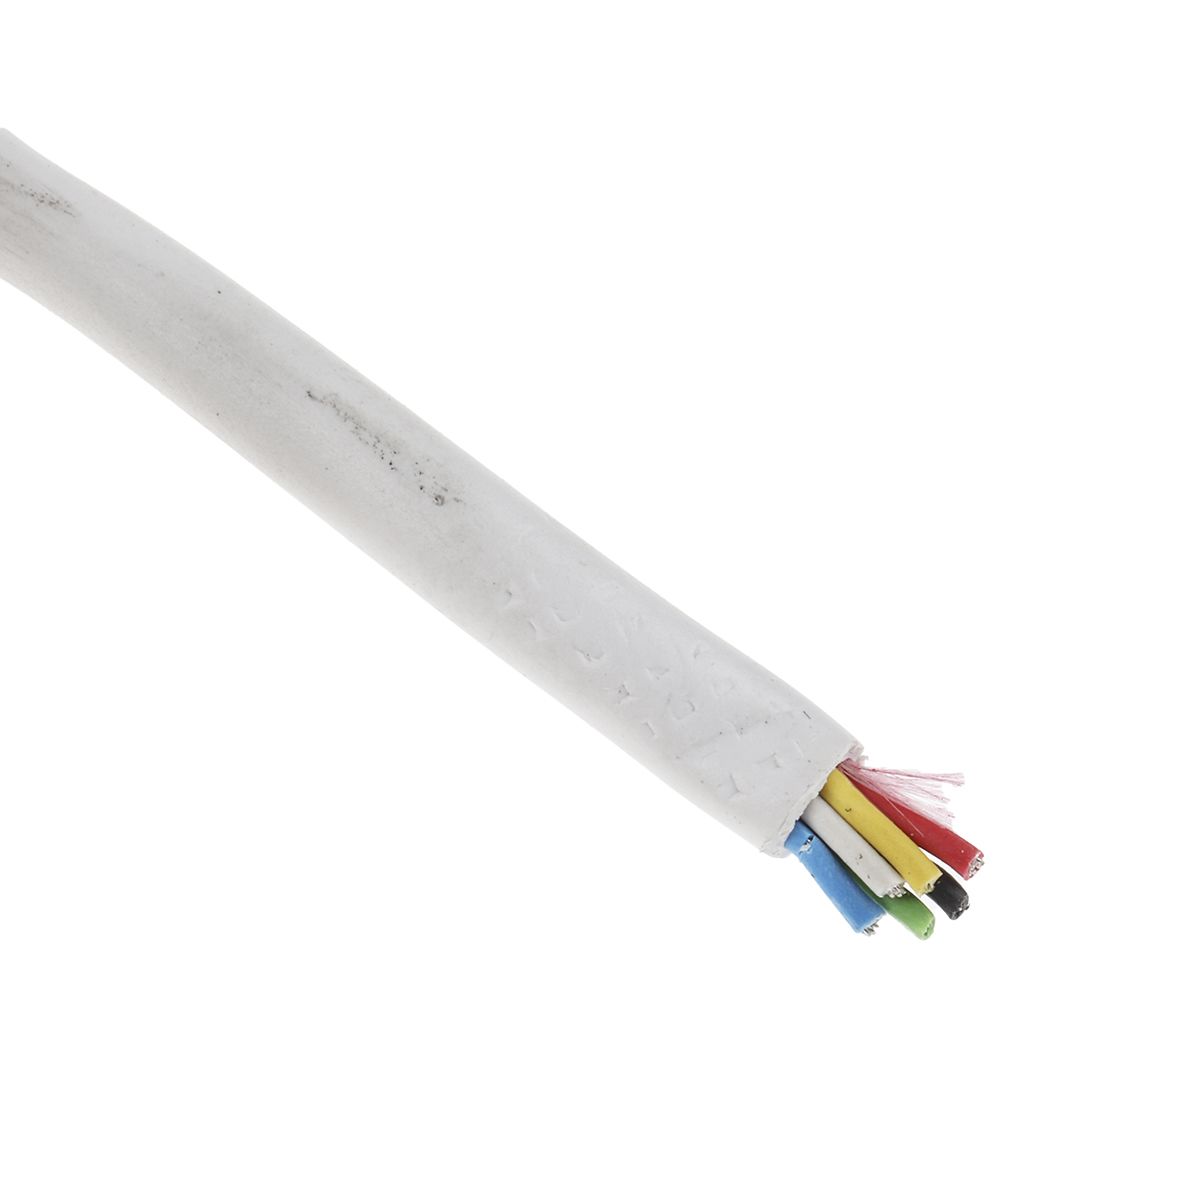 RS PRO Control Cable, 6 Cores, 0.19 mm², Unscreened, 100m, White PVC Sheath